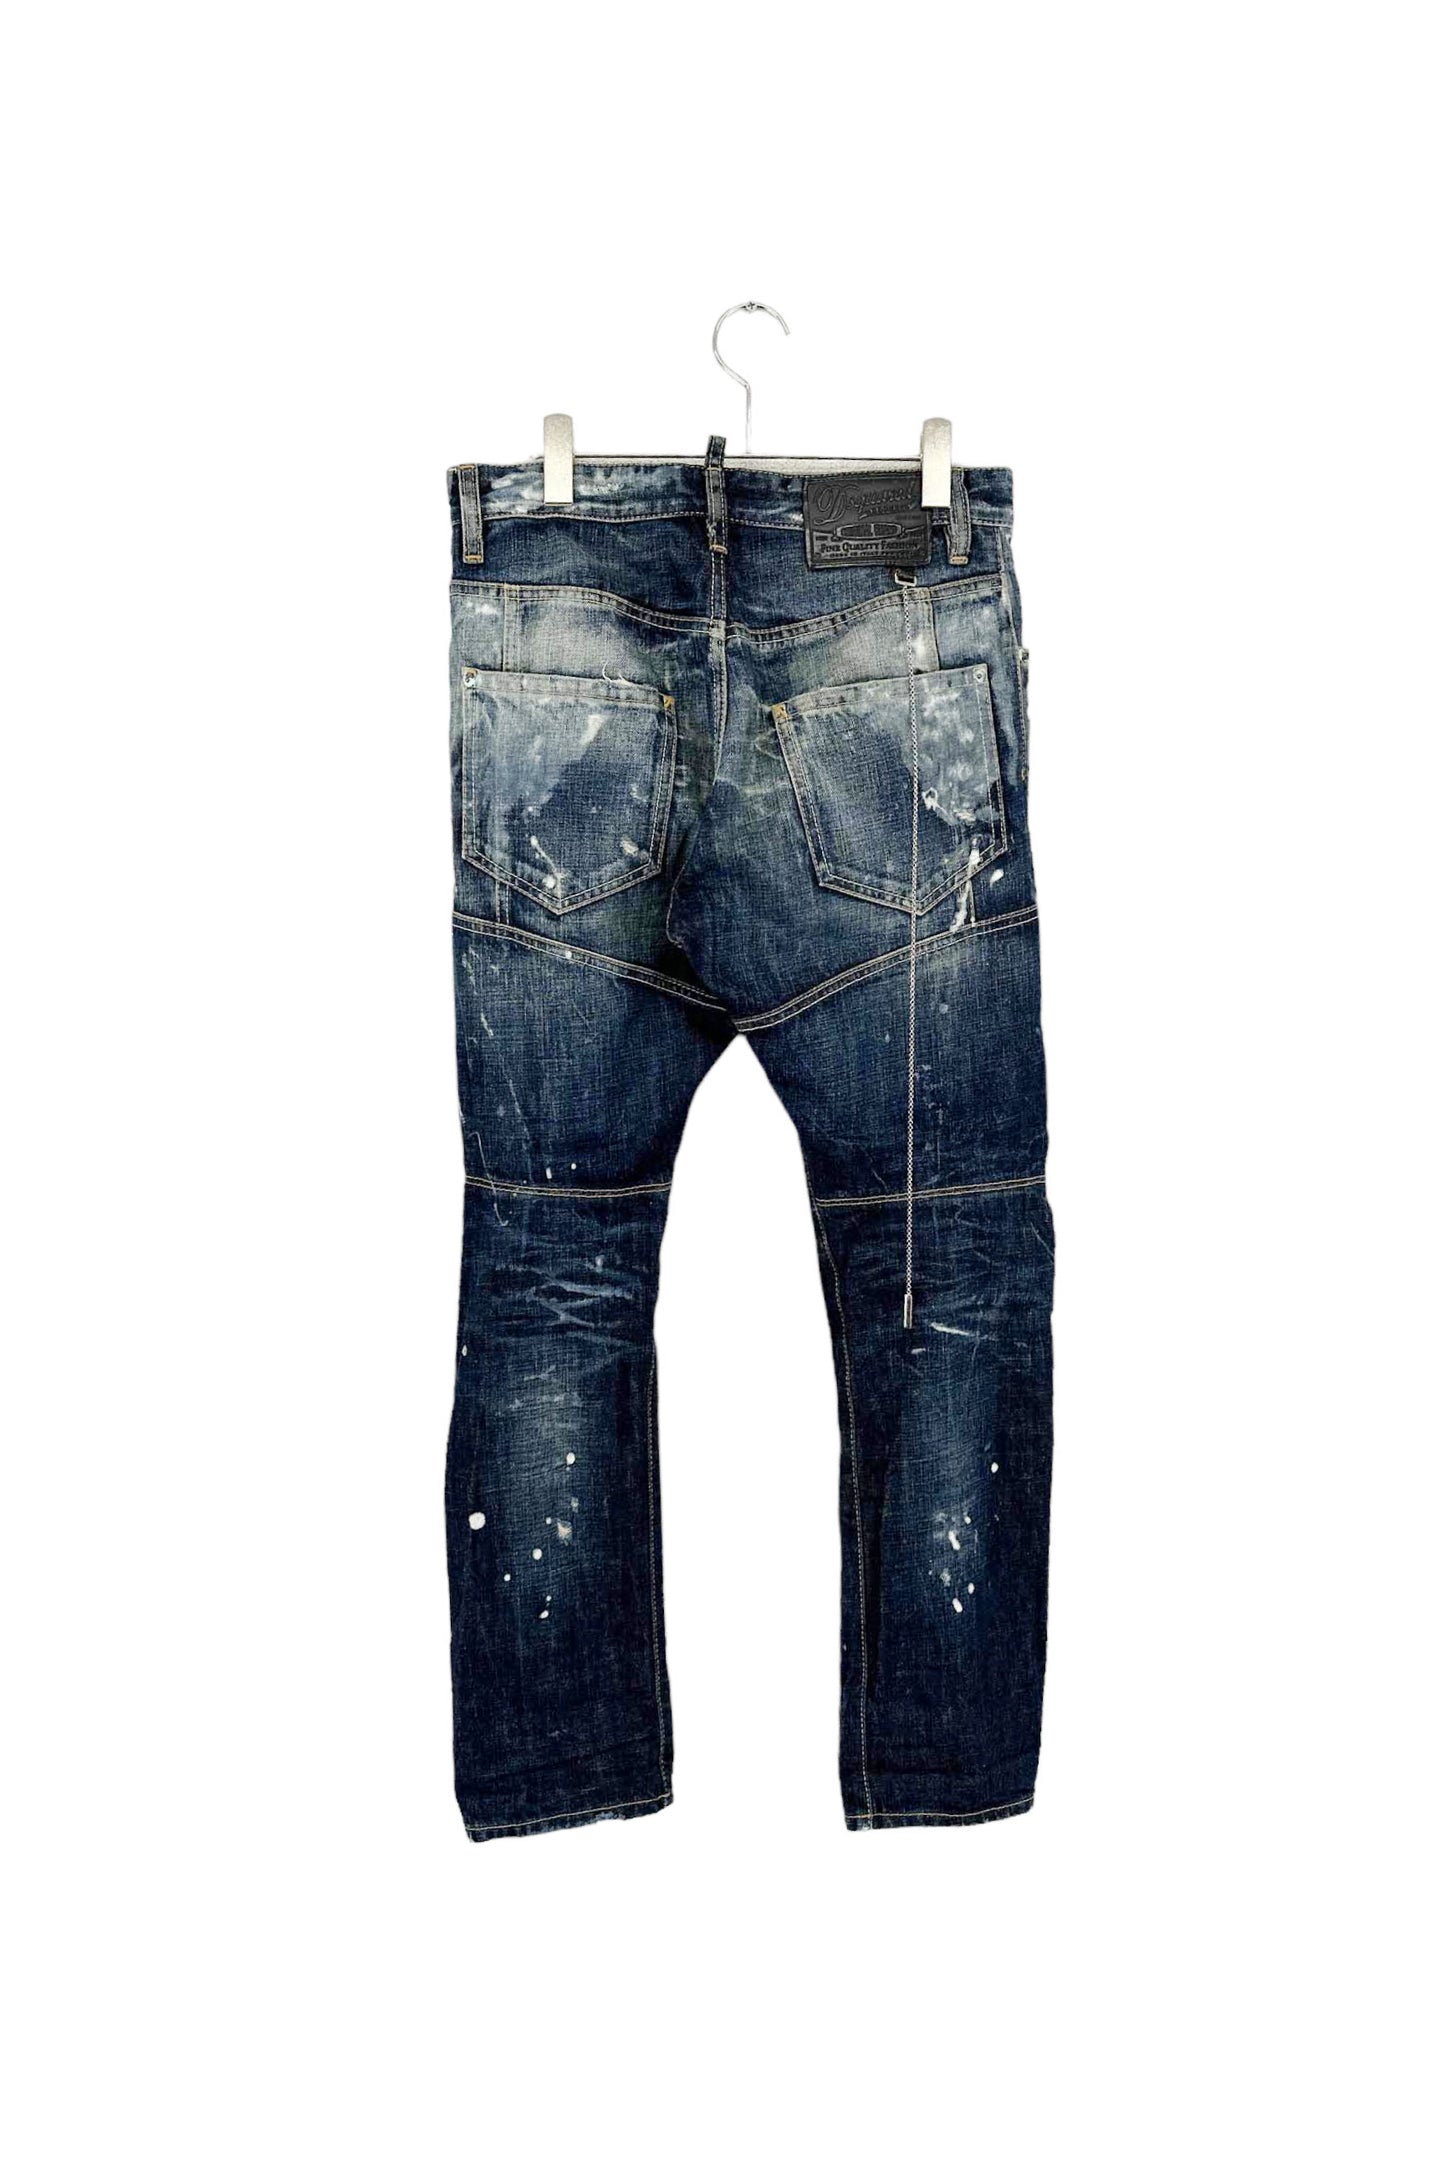 Made in ITALY DSQUARED2 bleaching denim pants